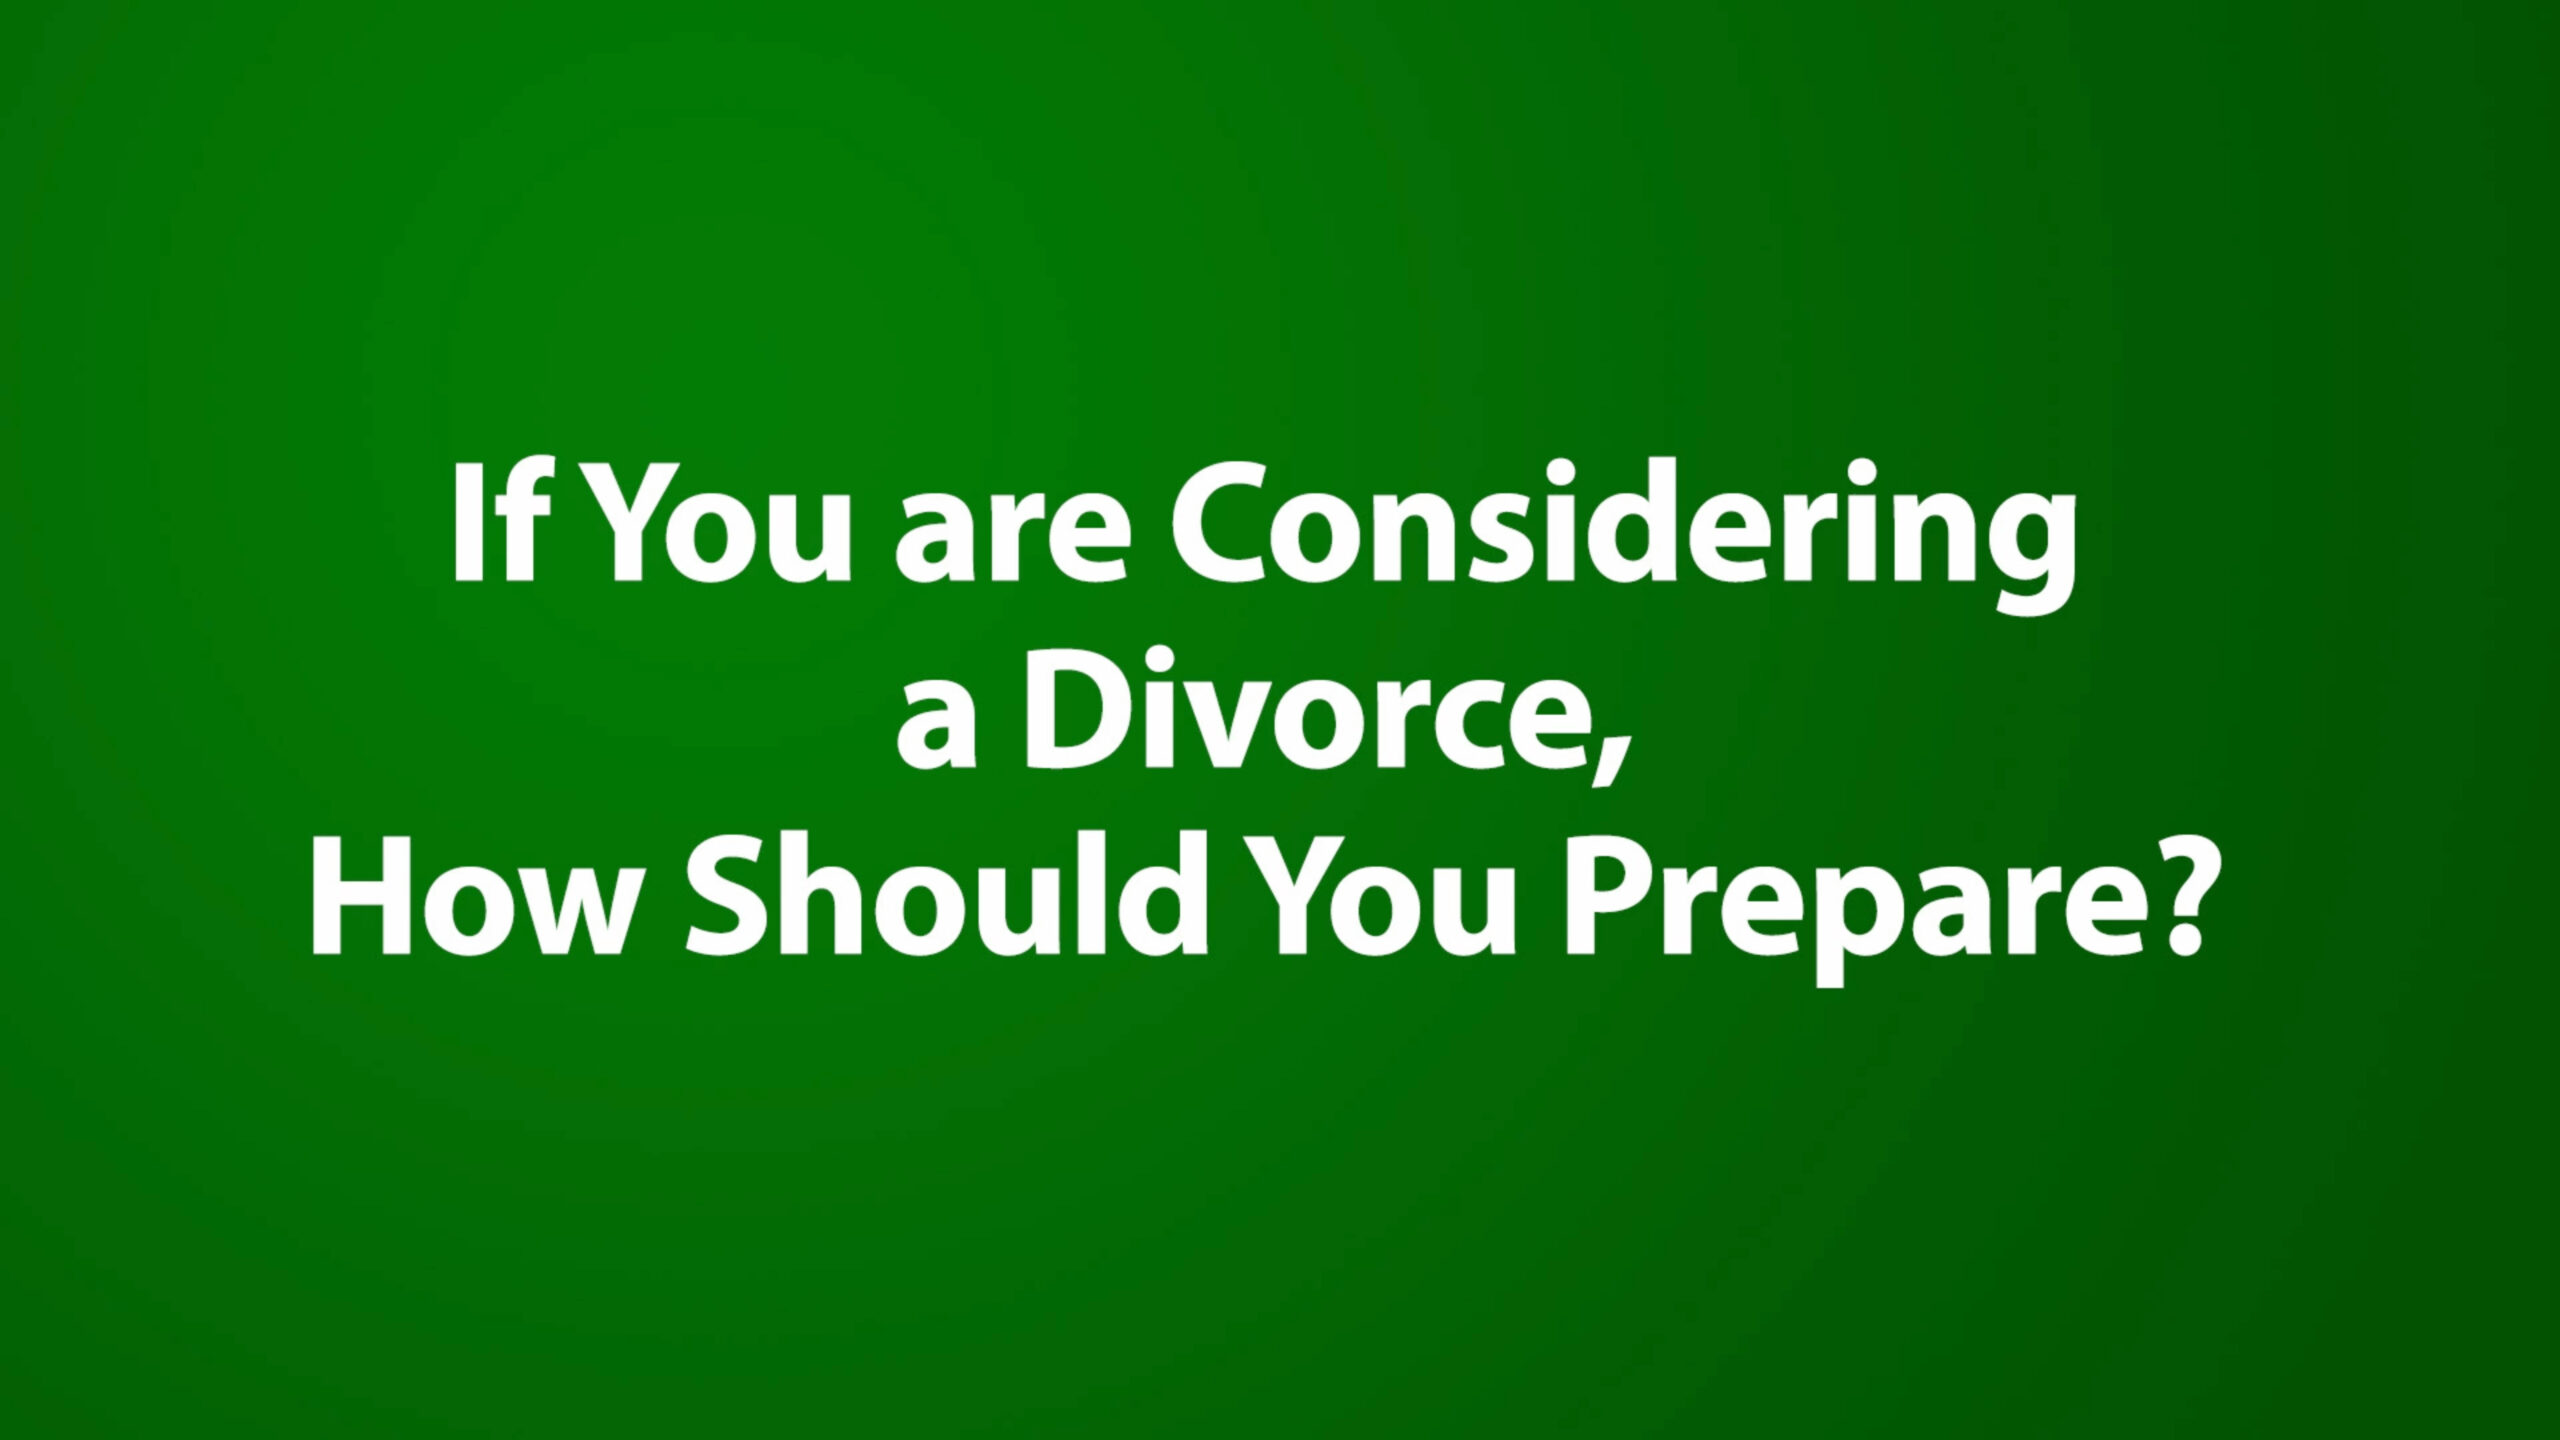 If you are considering a divorce, how should you prepare?